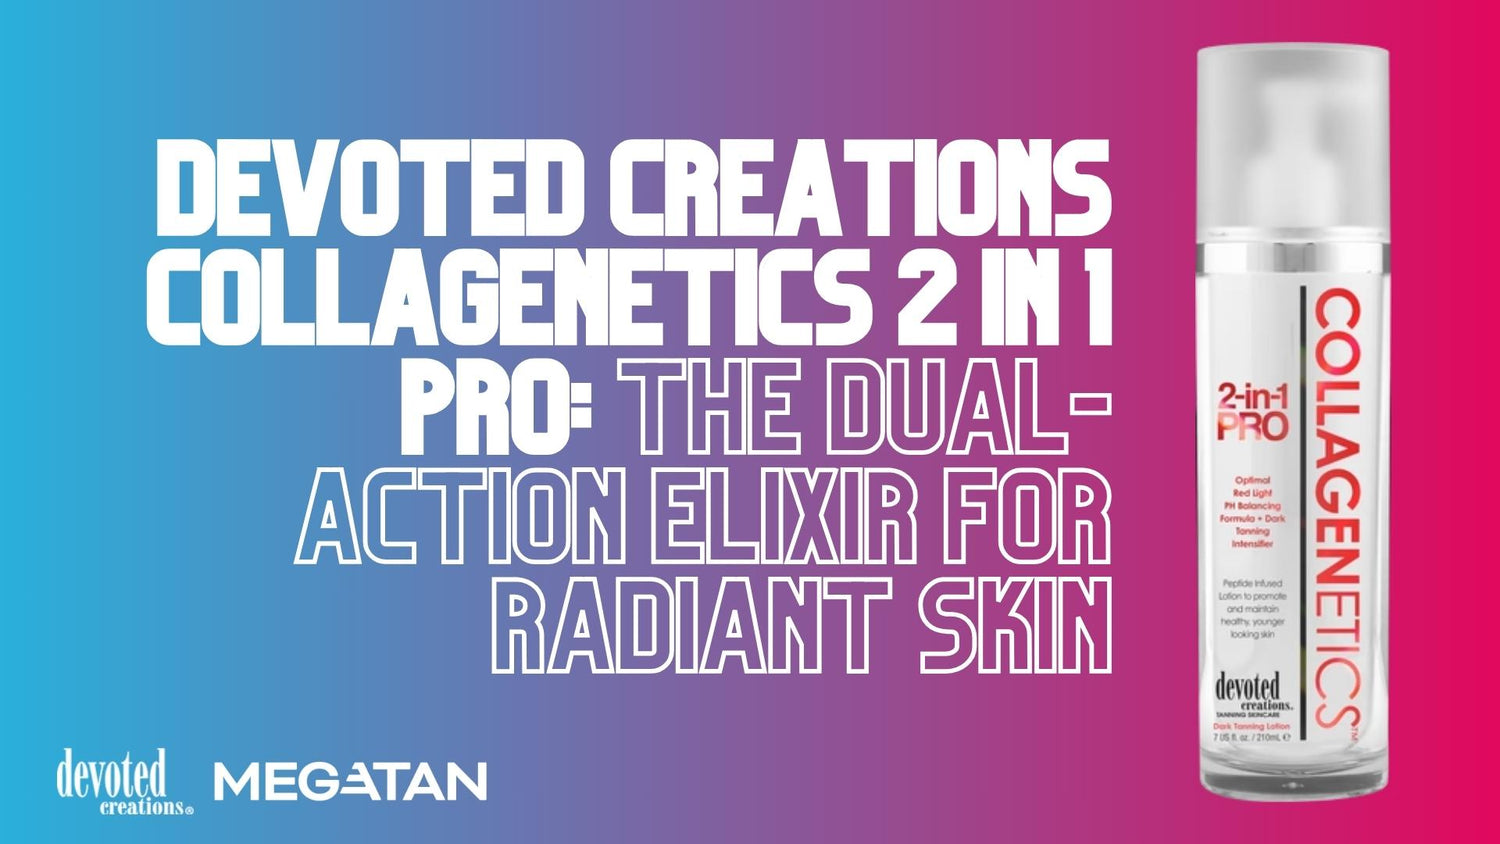 Devoted Creations Collagenetics 2 in 1 Pro: The Dual-Action Elixir for Radiant Skin